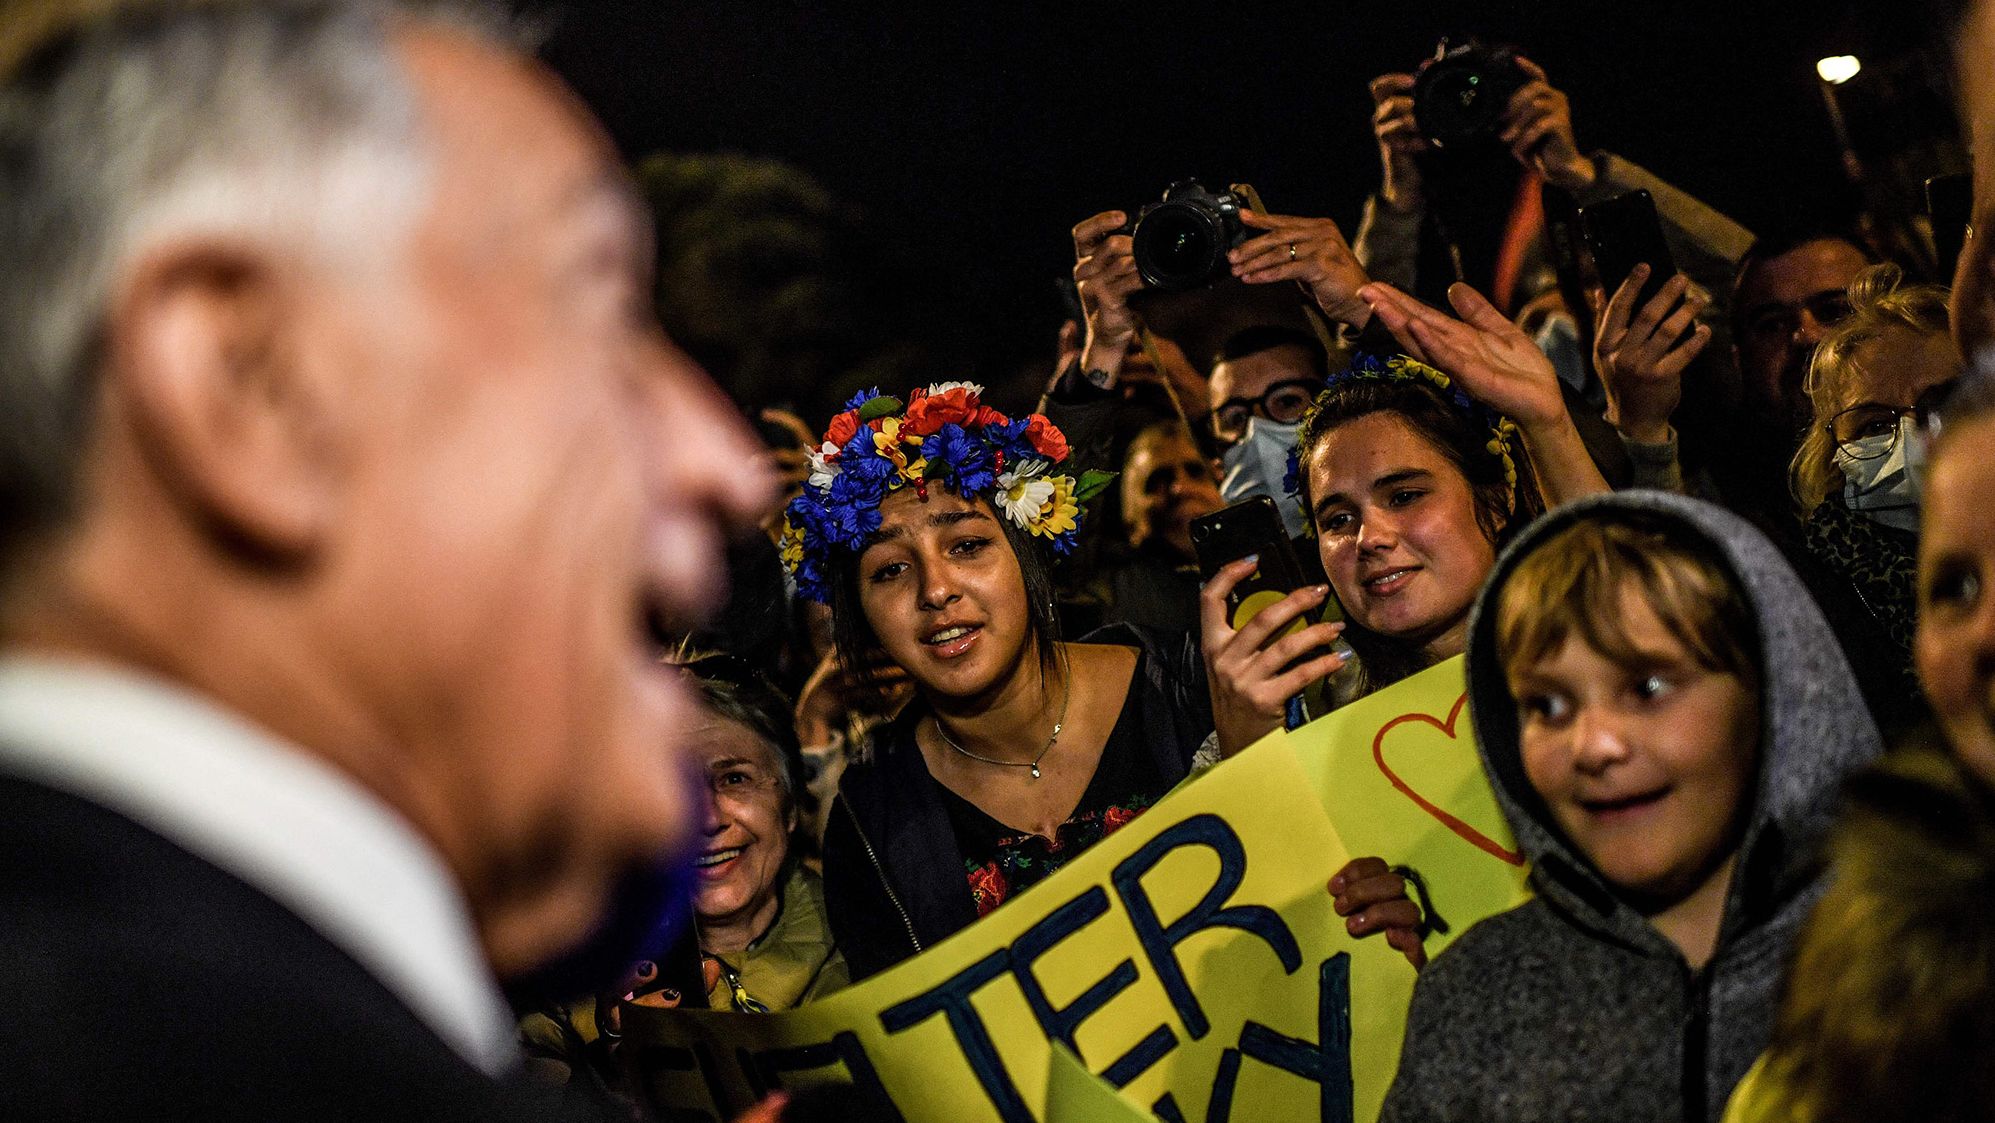 Portuguese President Marcelo Rebelo de Sousa meets with demonstrators outside Belem Palace in Lisbon, Portugal, to show his support on February 26.